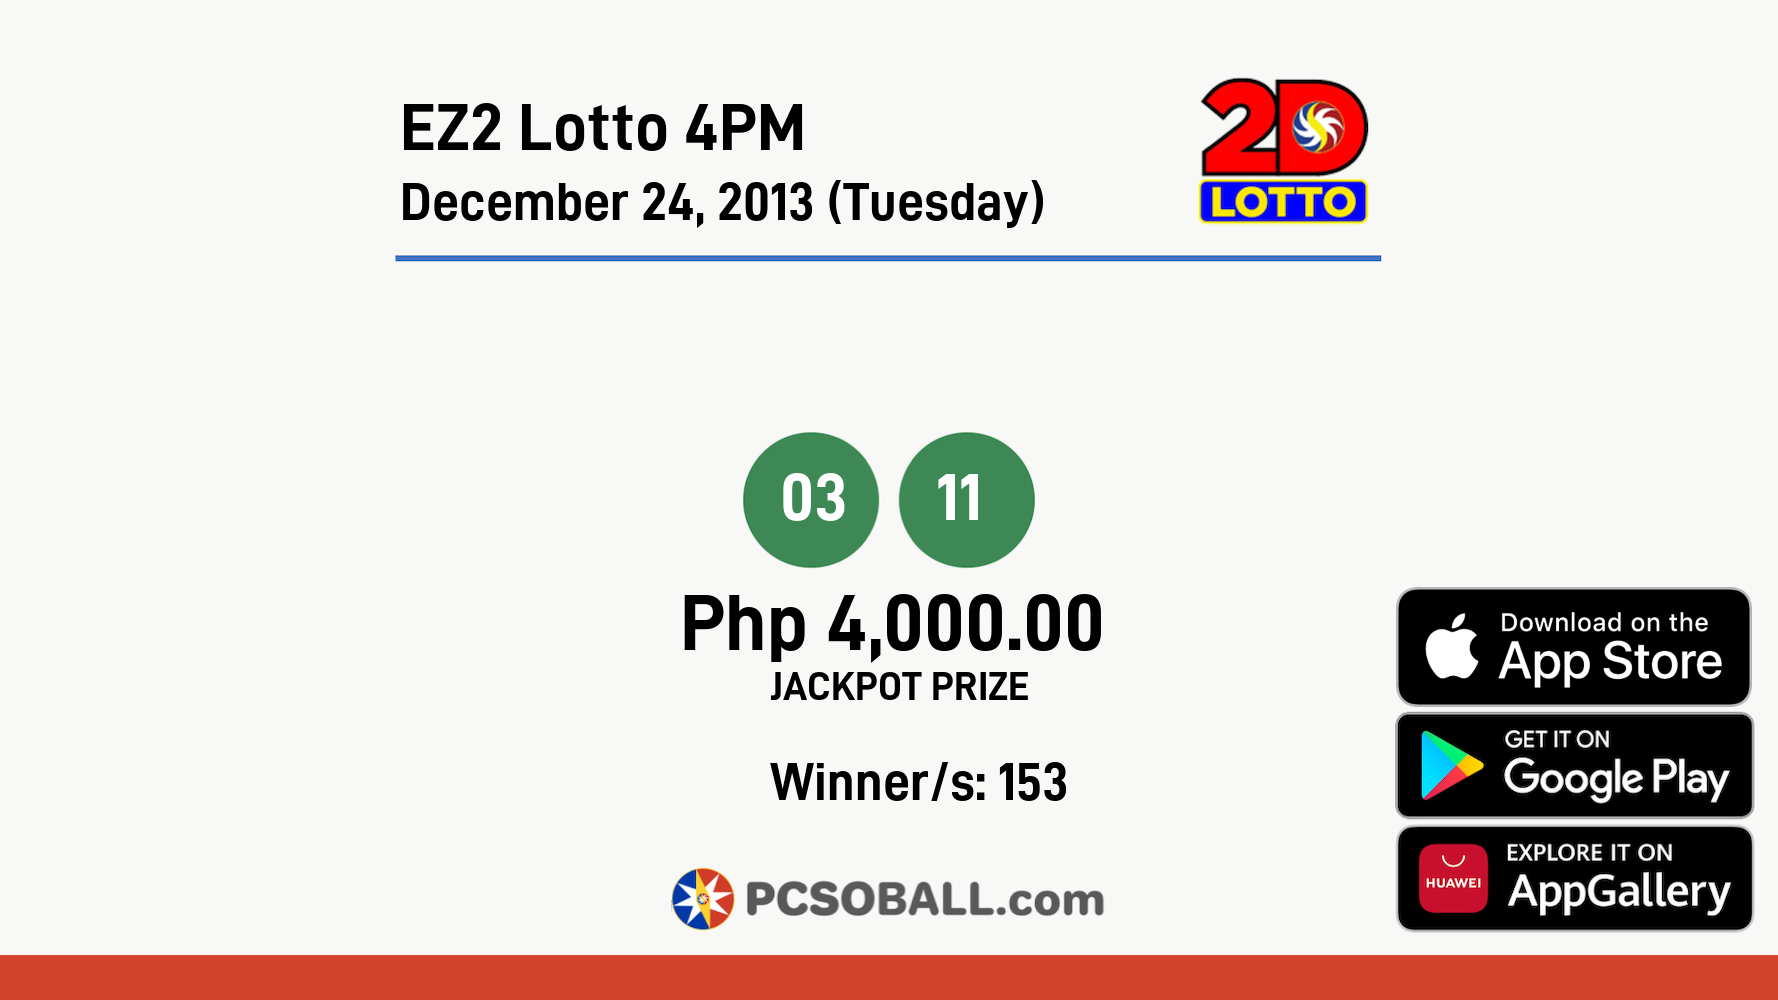 EZ2 Lotto 4PM December 24, 2013 (Tuesday) Result